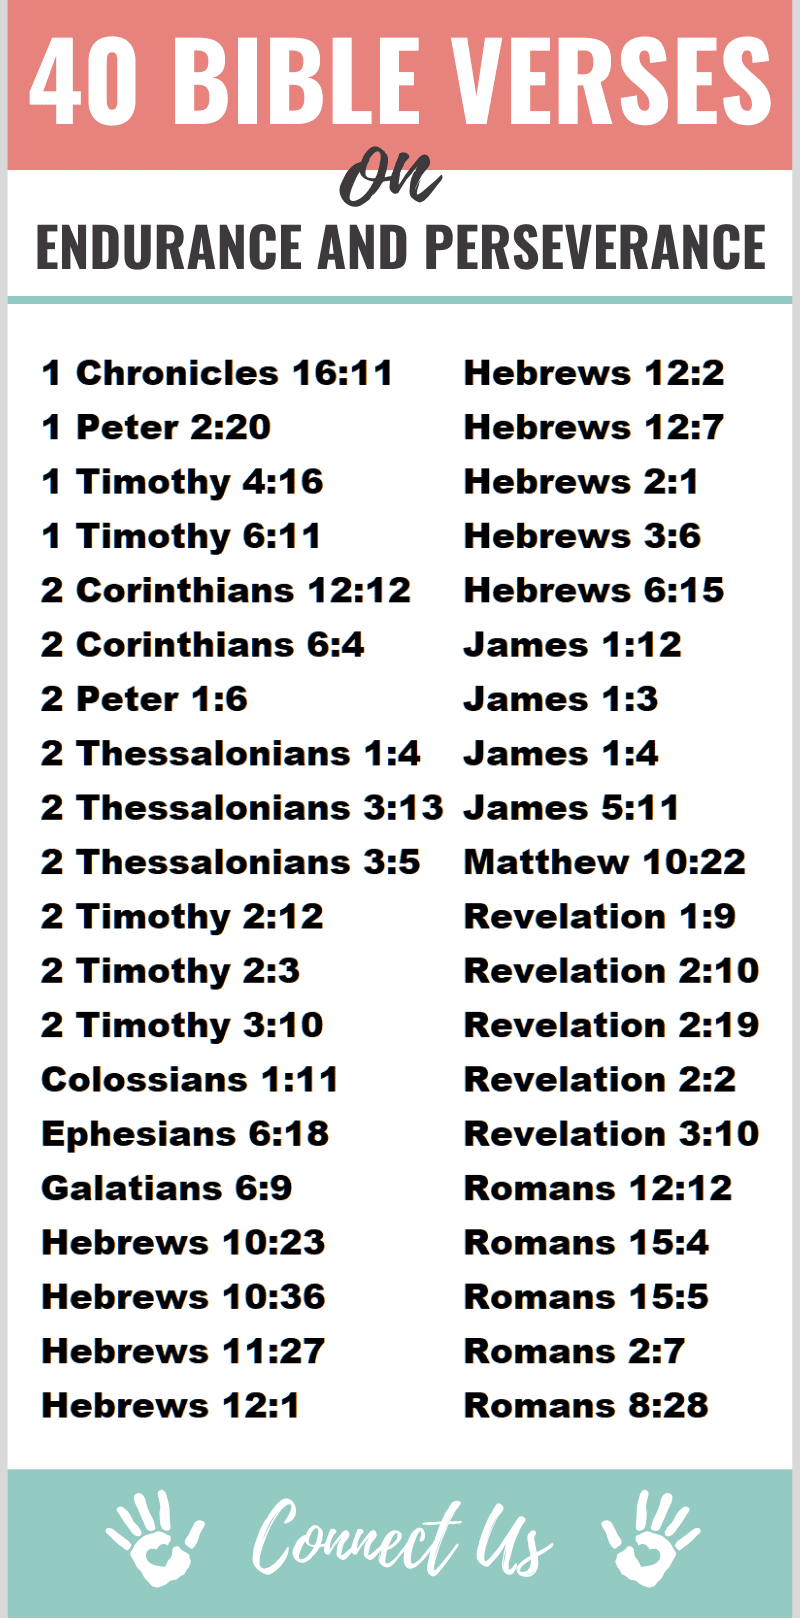 Bible Verses on Endurance and Perseverance